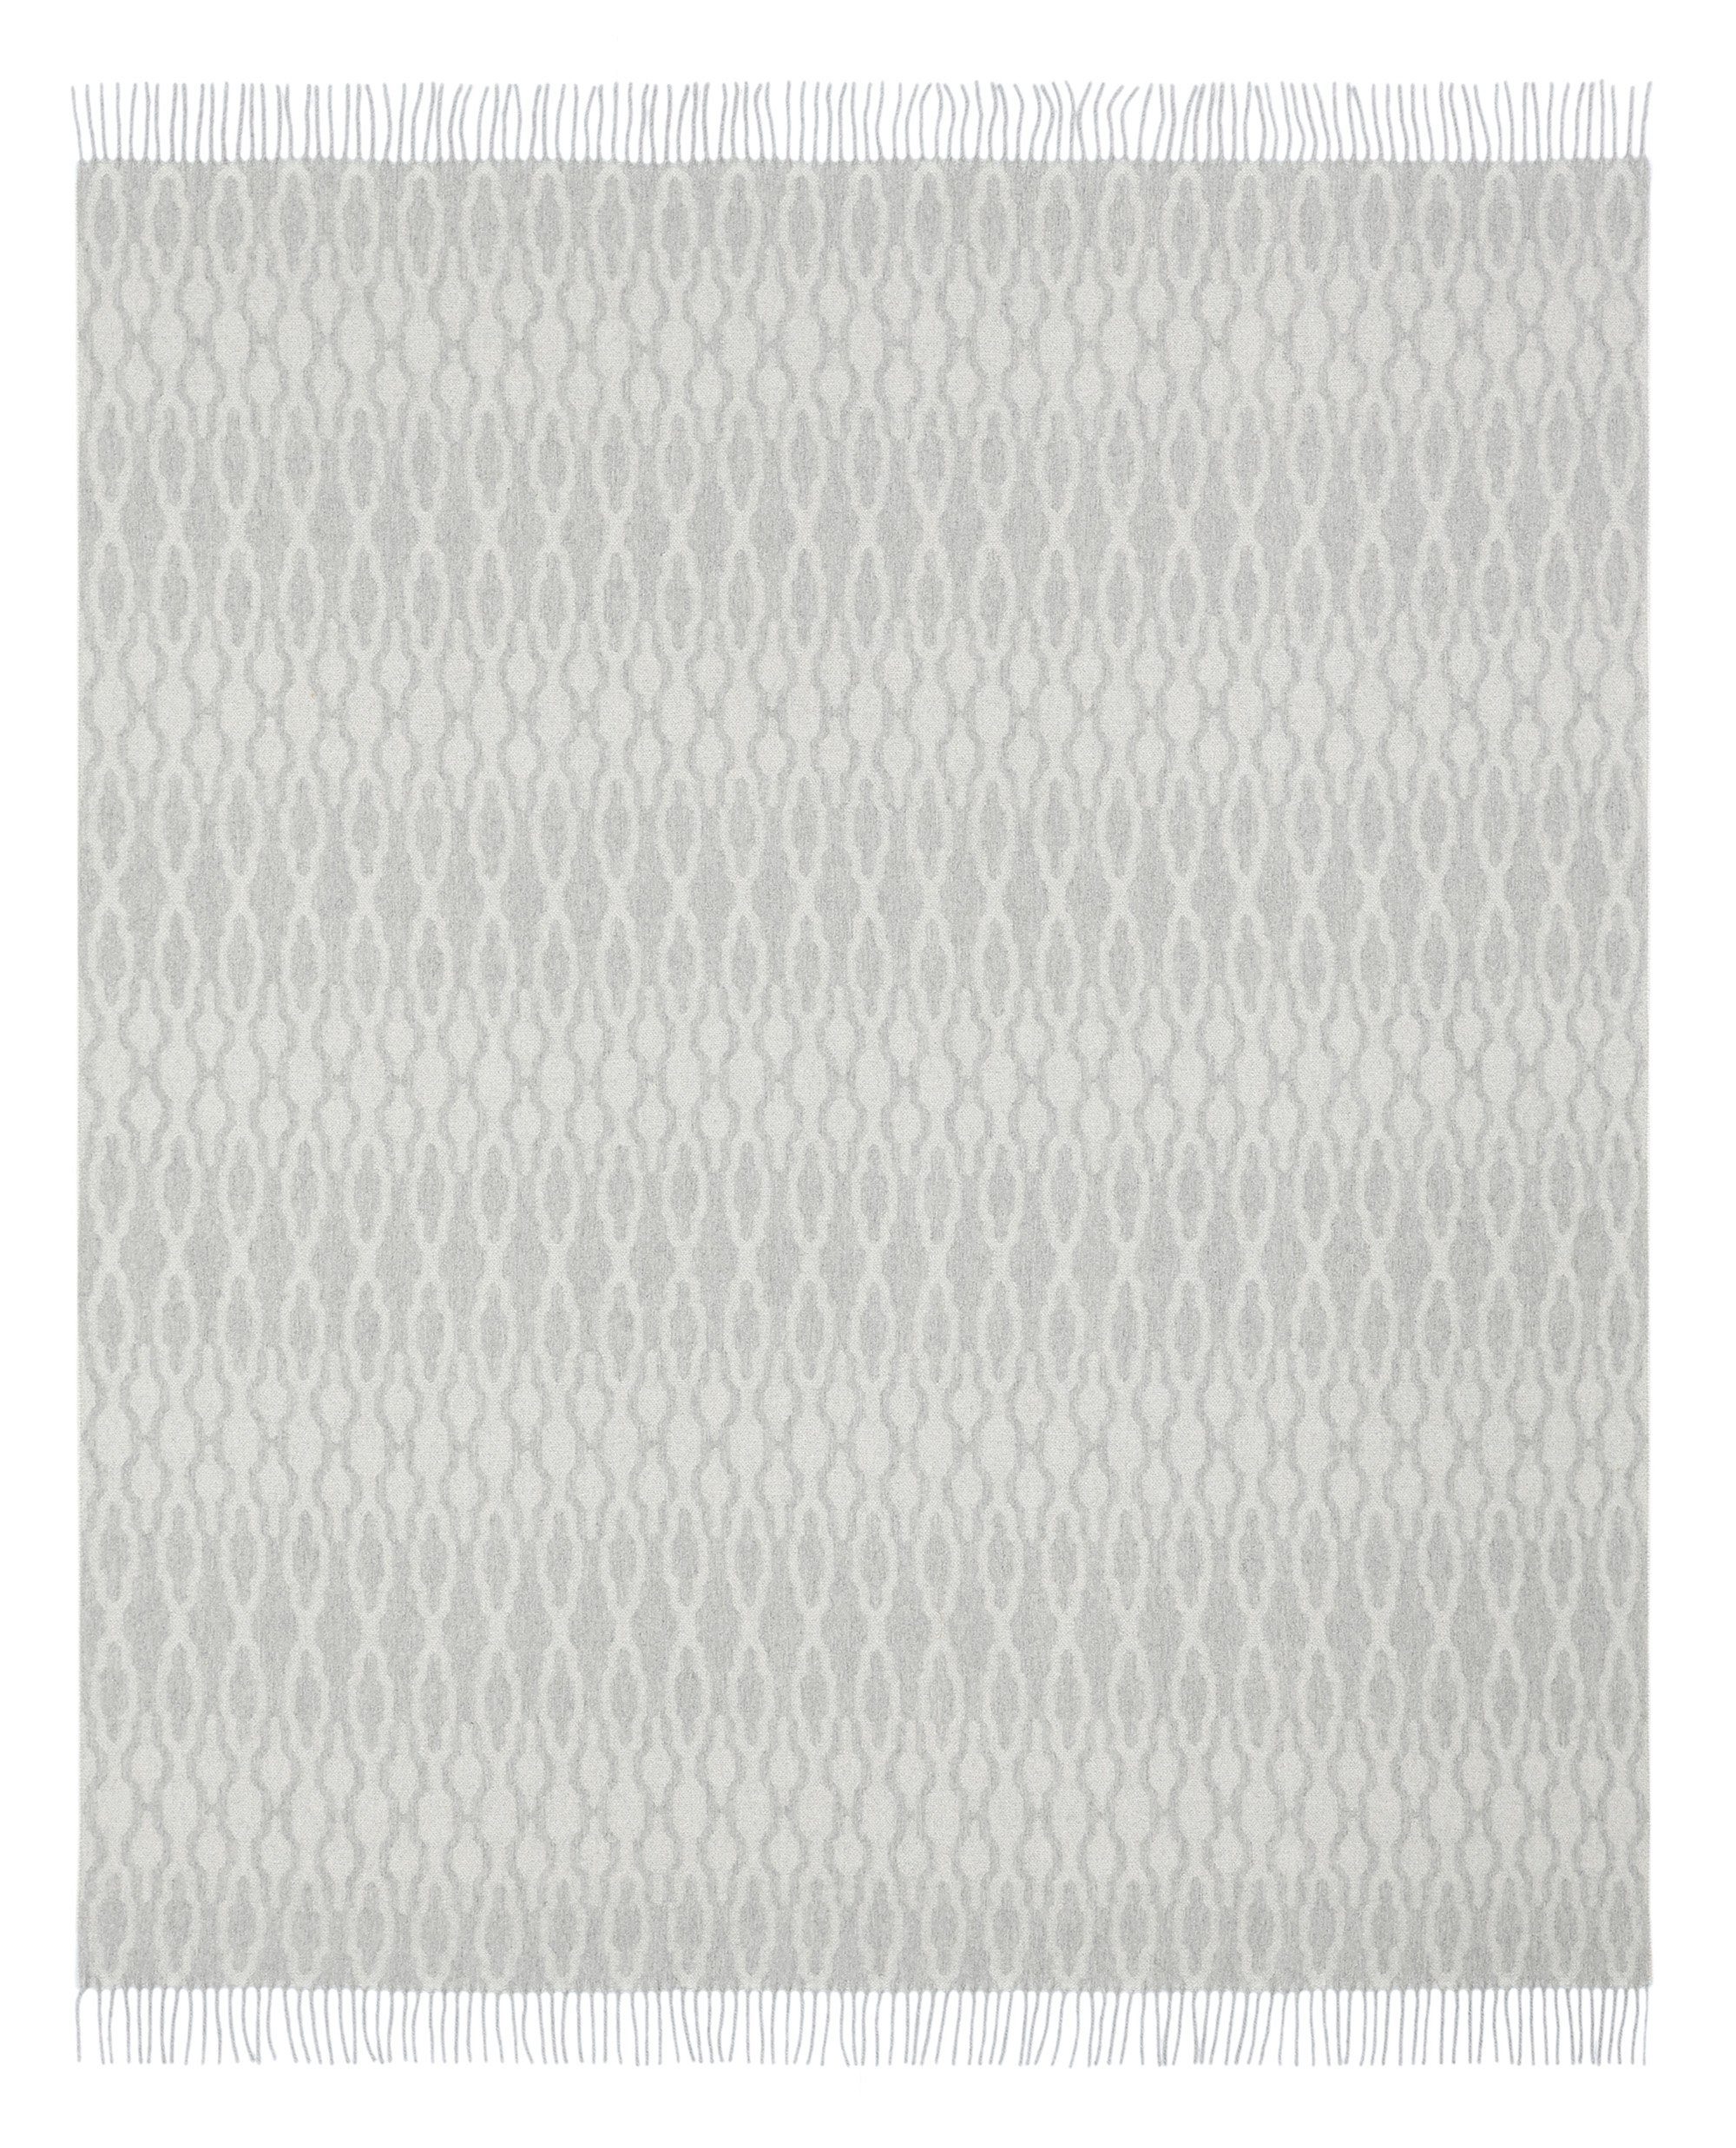 Wohndecke Enigma French Linen, Fransenplaid in 130x170 cm, Made in Italy, Villeroy & Boch, Made in Italy